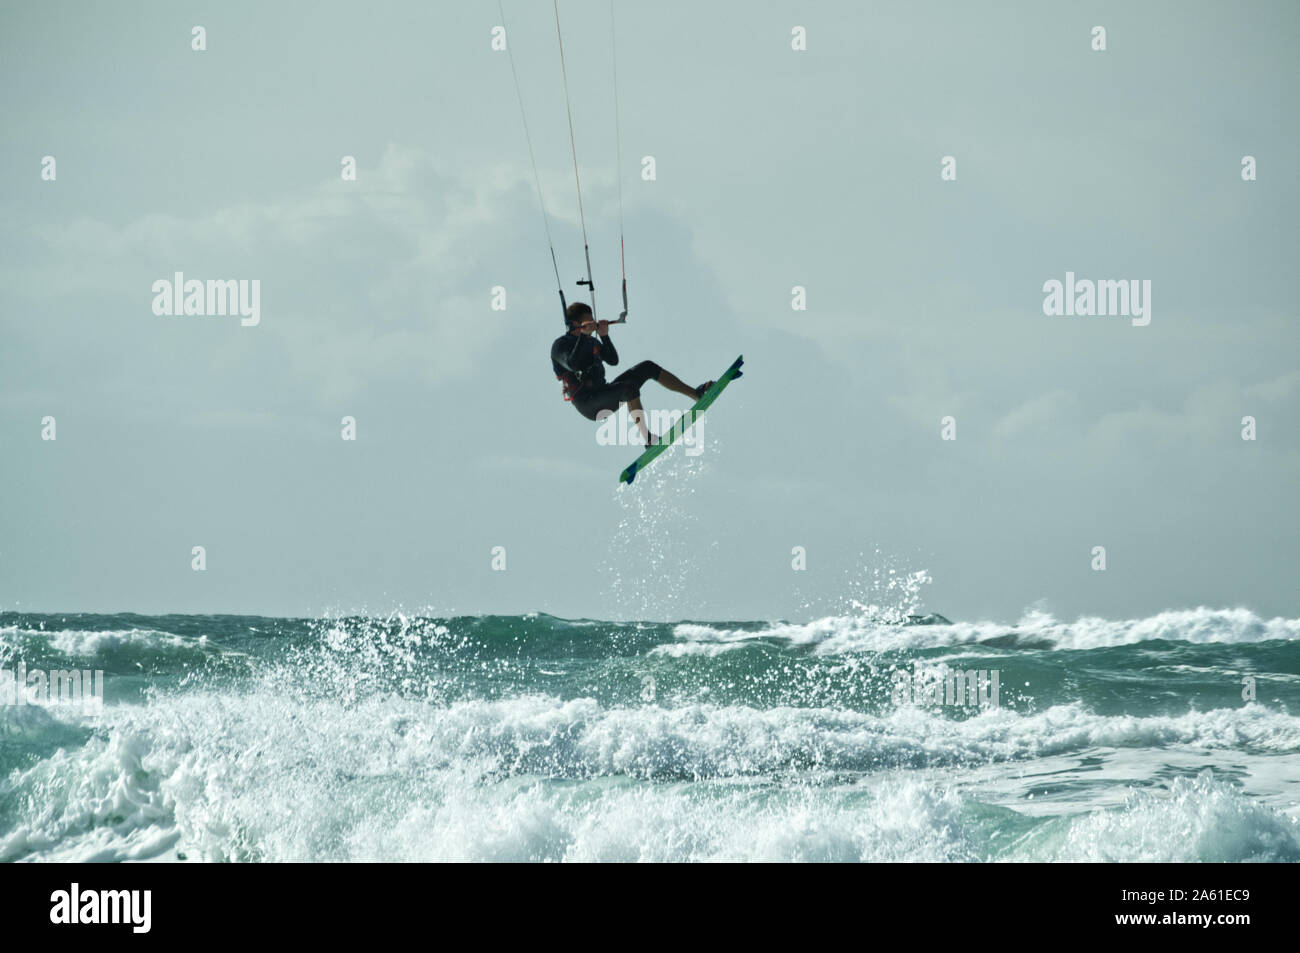 Kite surfer jumping off a breaking wave and flying through the air, lifted by the kite, Atlantic coast, Lacanau-Océan, France. Stock Photo